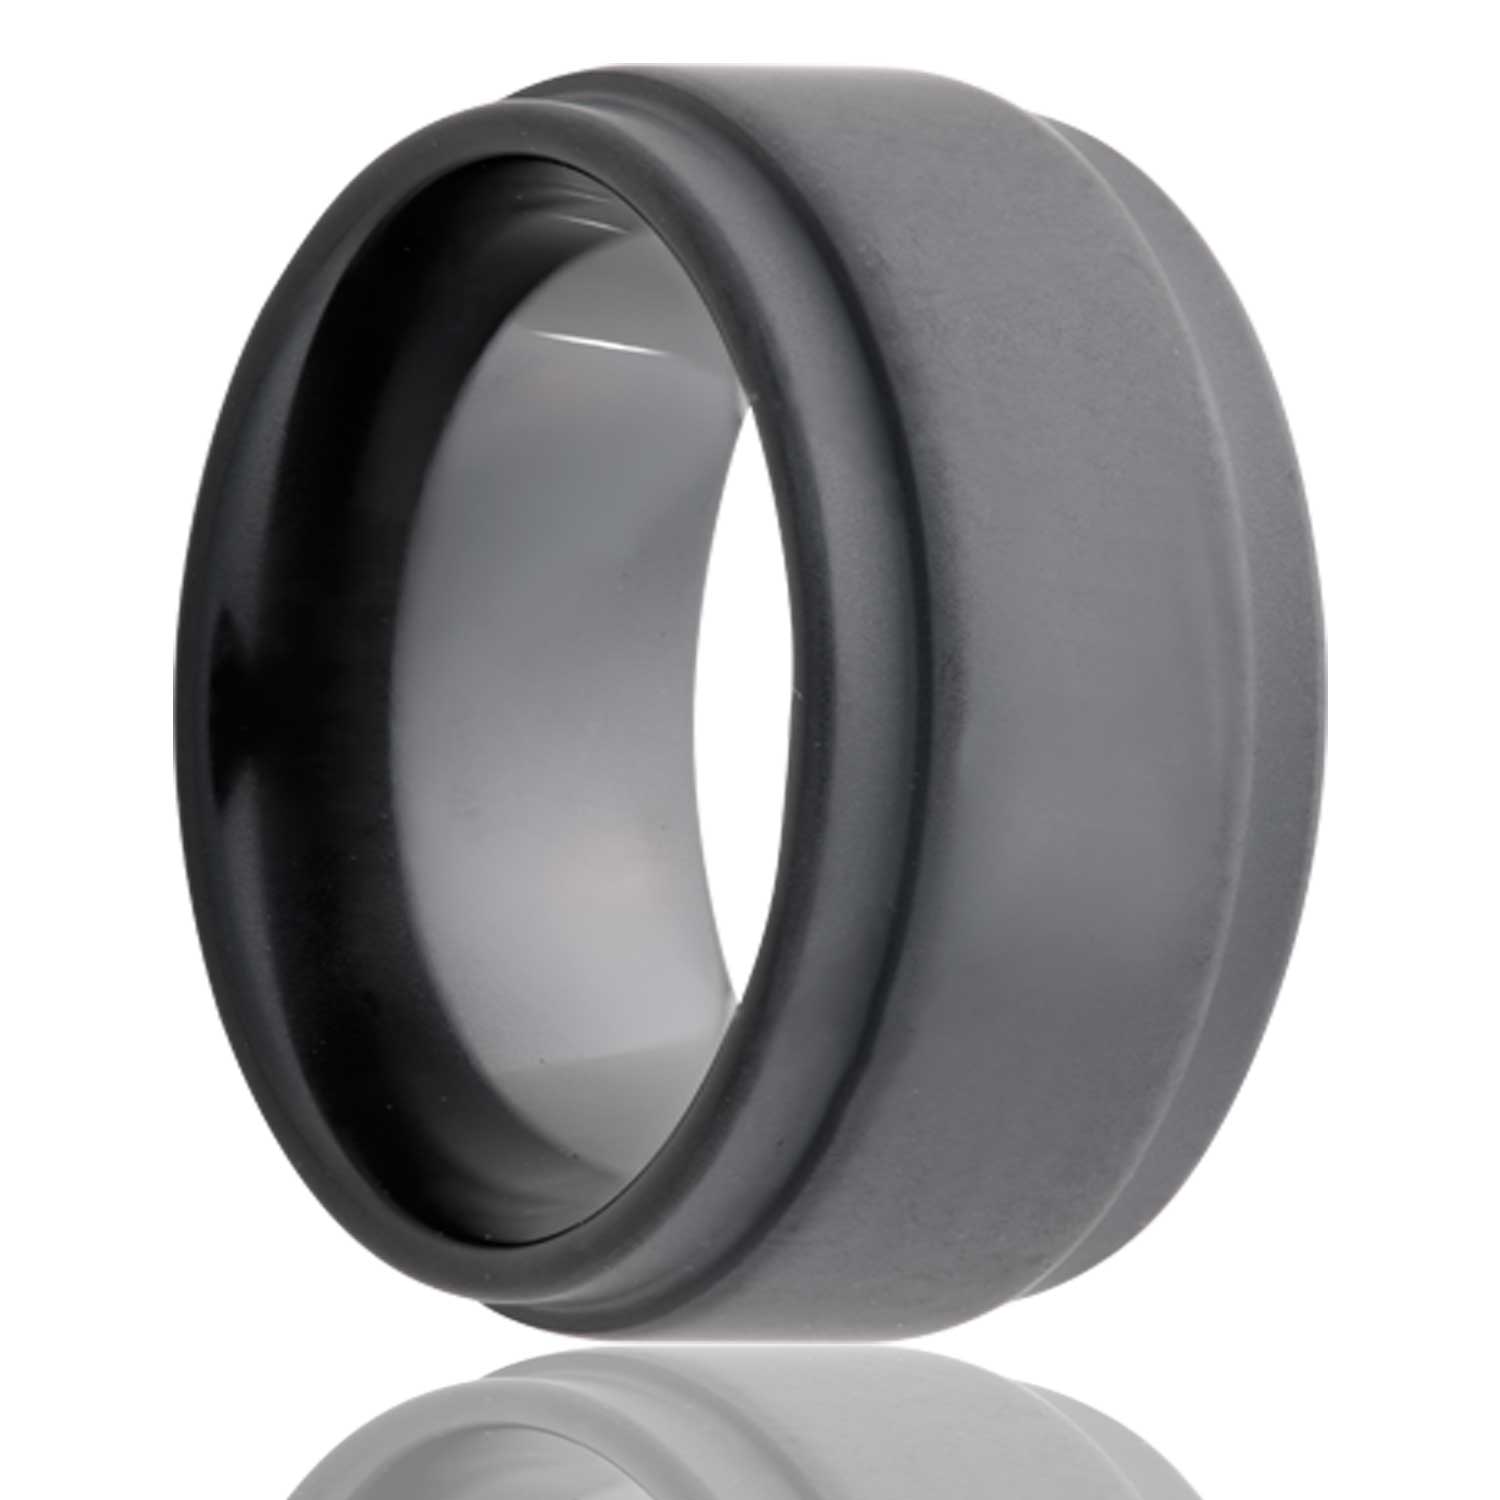 A sandblasted black ceramic men's wedding band with stepped edges displayed on a neutral white background.